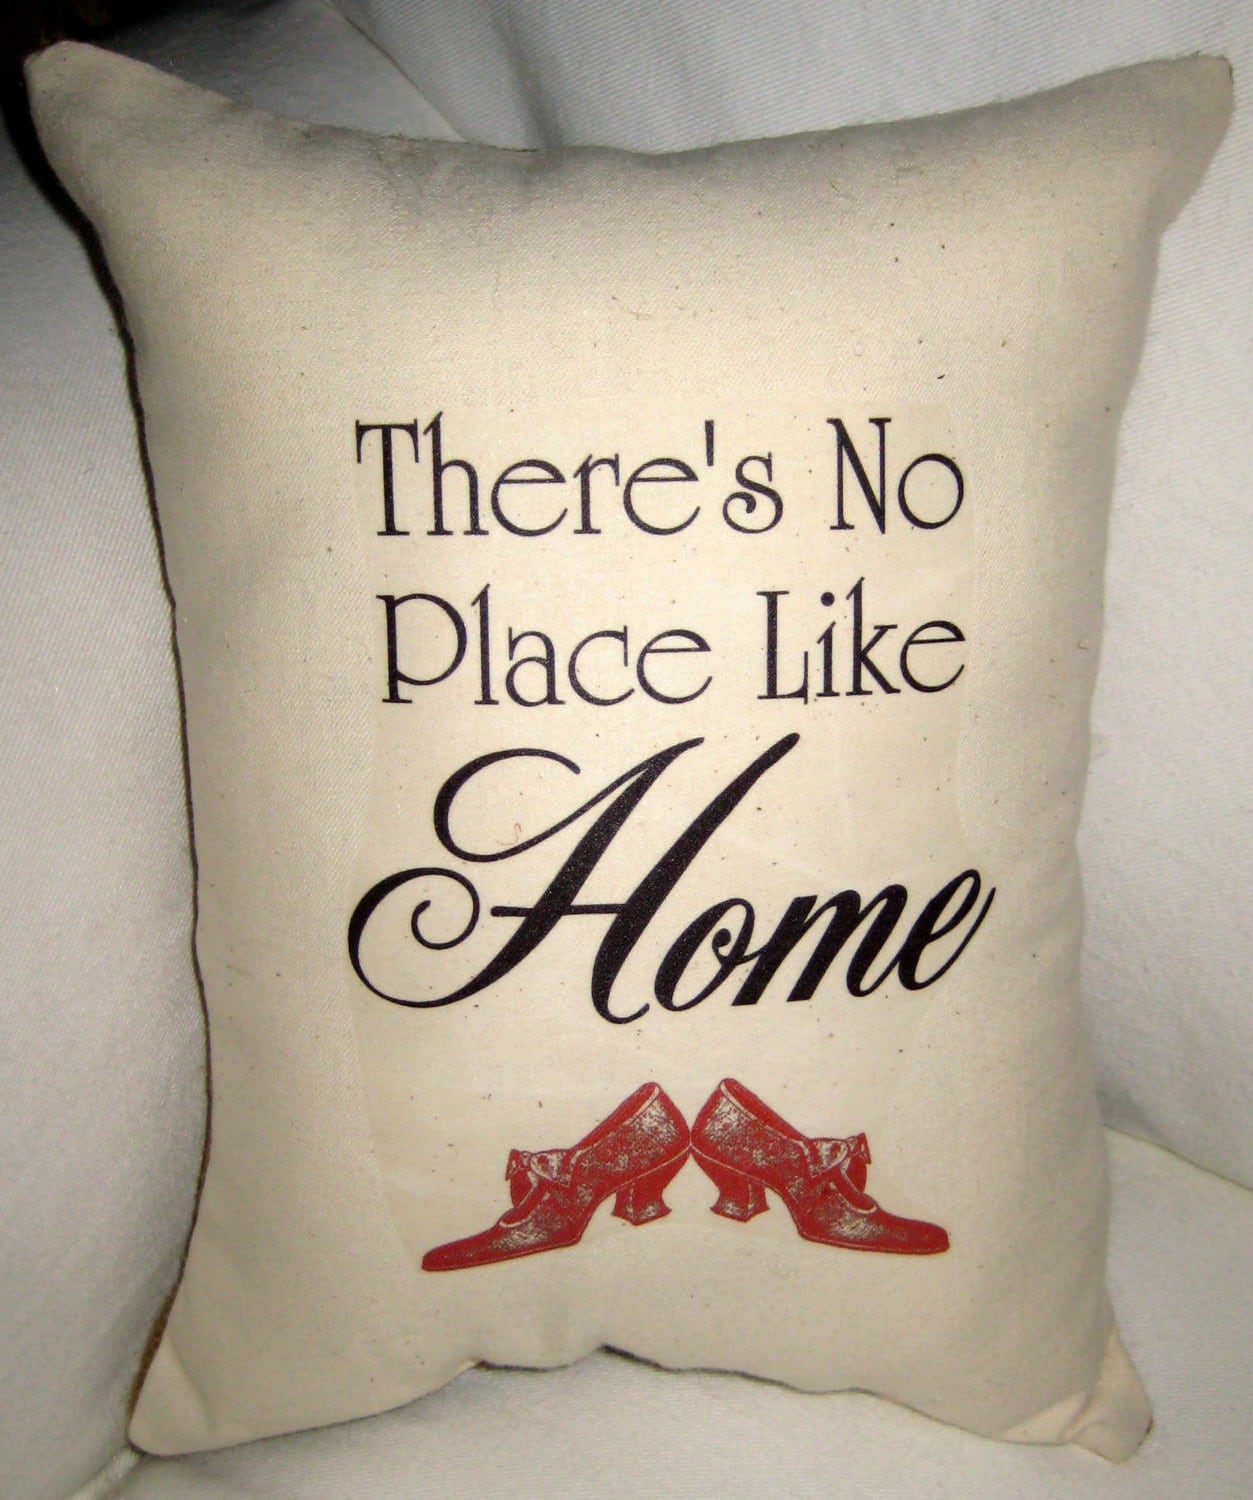 Like home and good. There is no place like Home. There is no place like Home картинки. There’s no place like Home. Картинки.